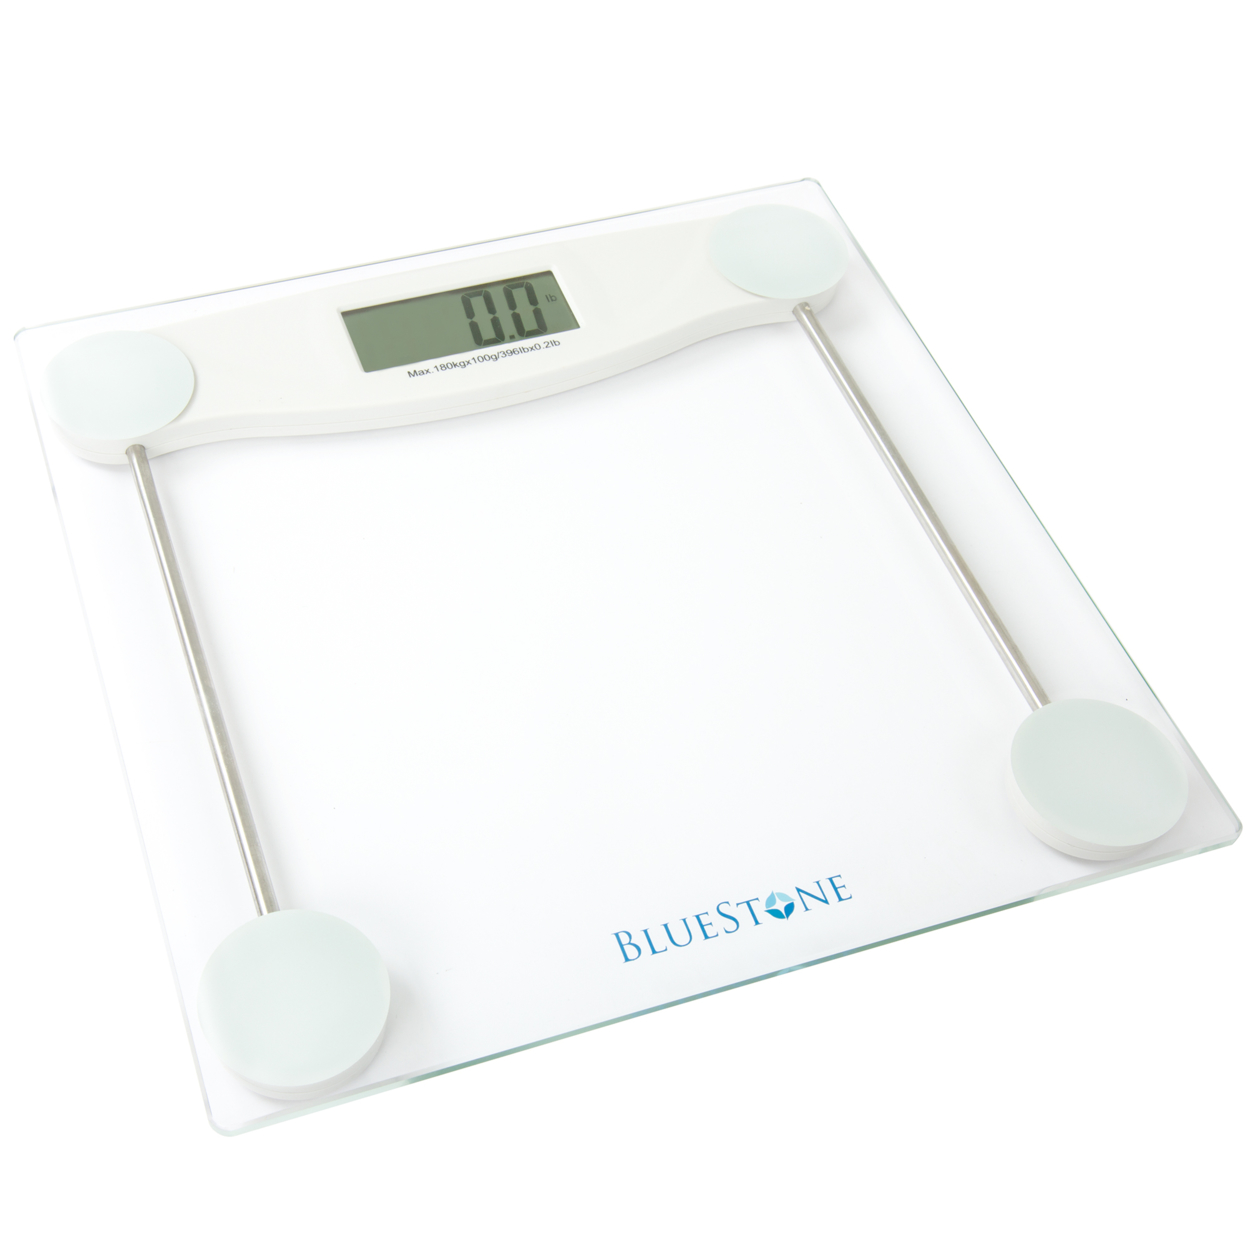 Digital Body Weight Bathroom Scale, Cordless Battery Operated Large LCD Display For Health